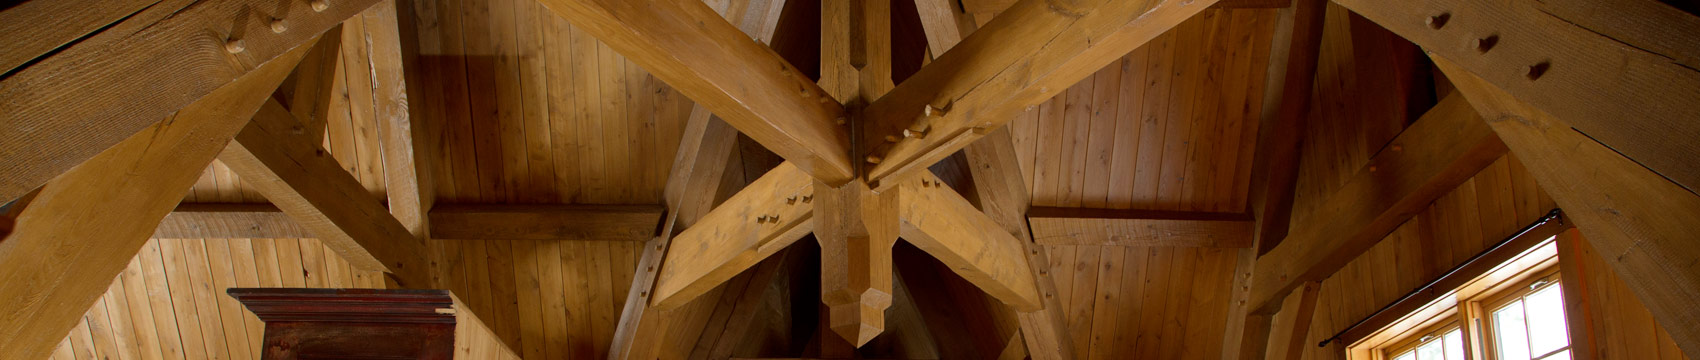 Conventional wood framing